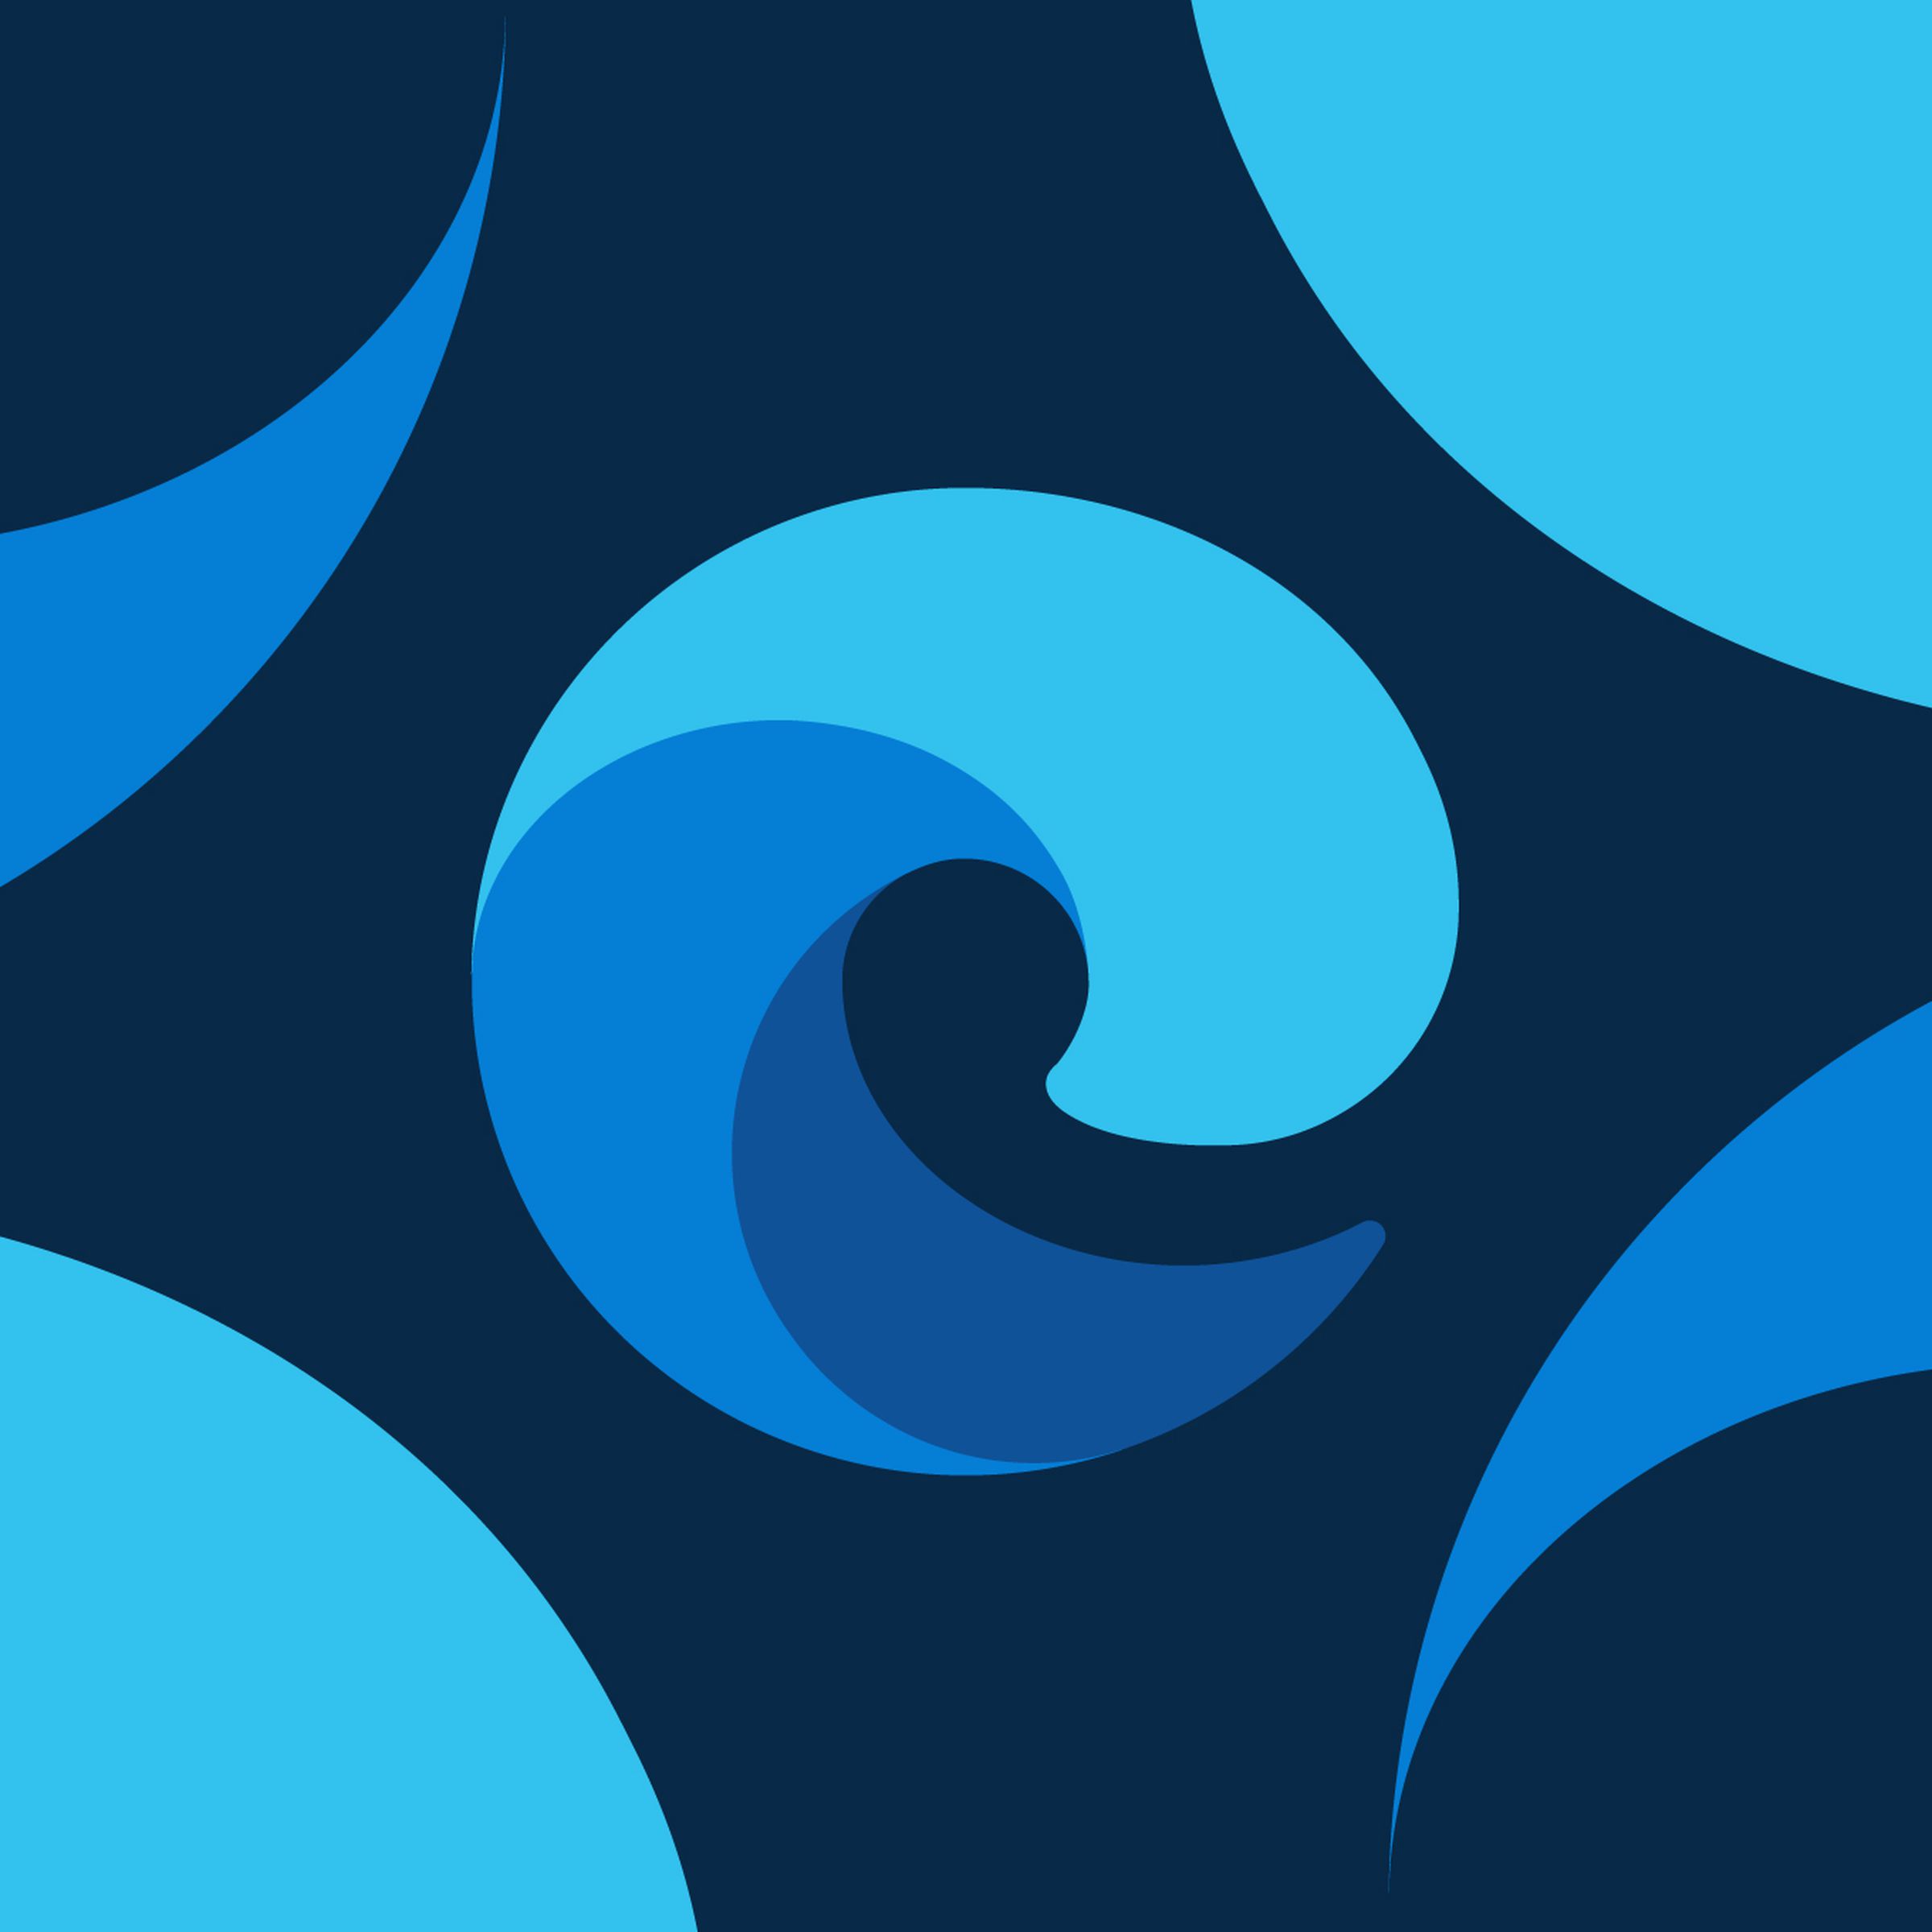 The Microsoft Edge web browser logo against a swirling blue background.